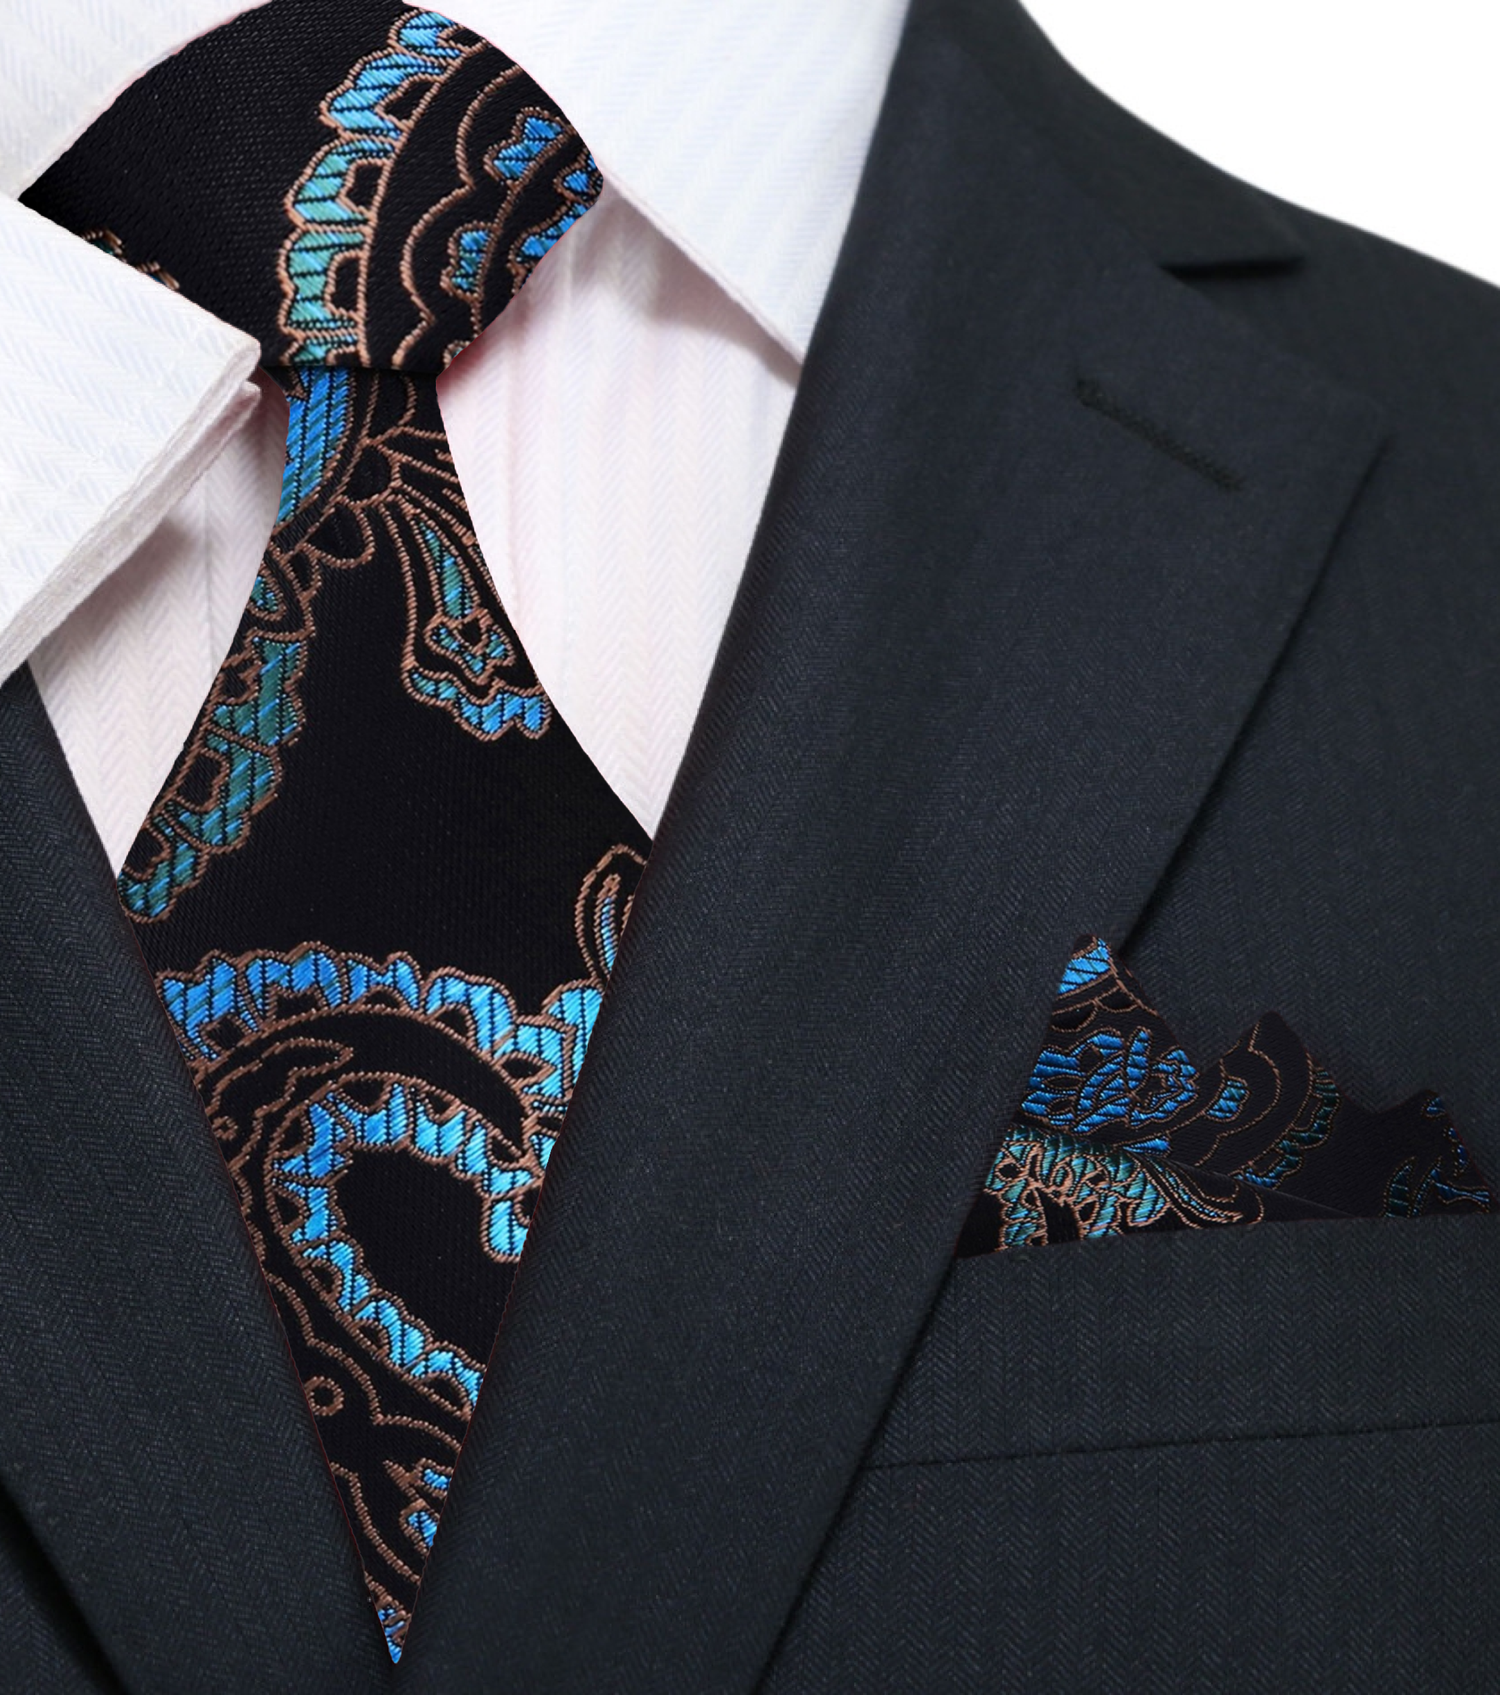 Black, Teal Paisley Tie and Pocket Square